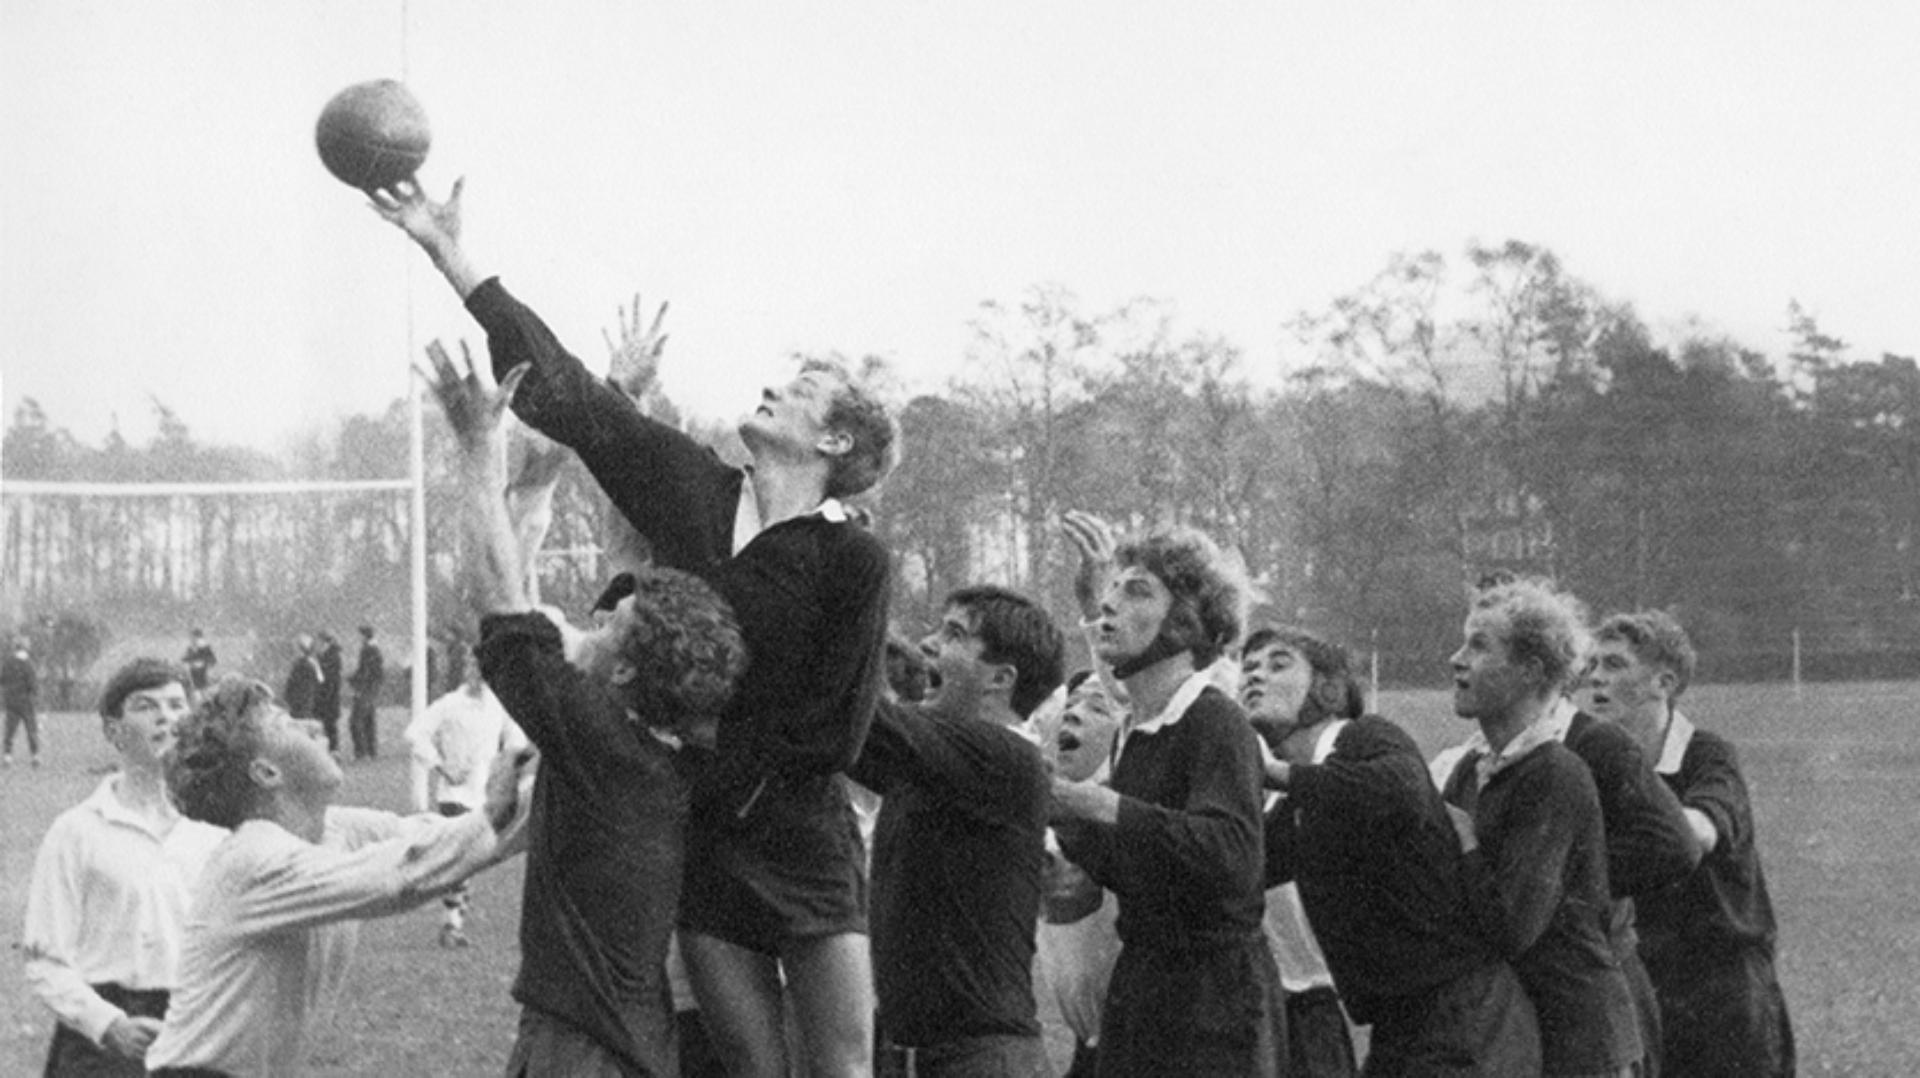 James Dyson reaches for the ball in a rugby lineout